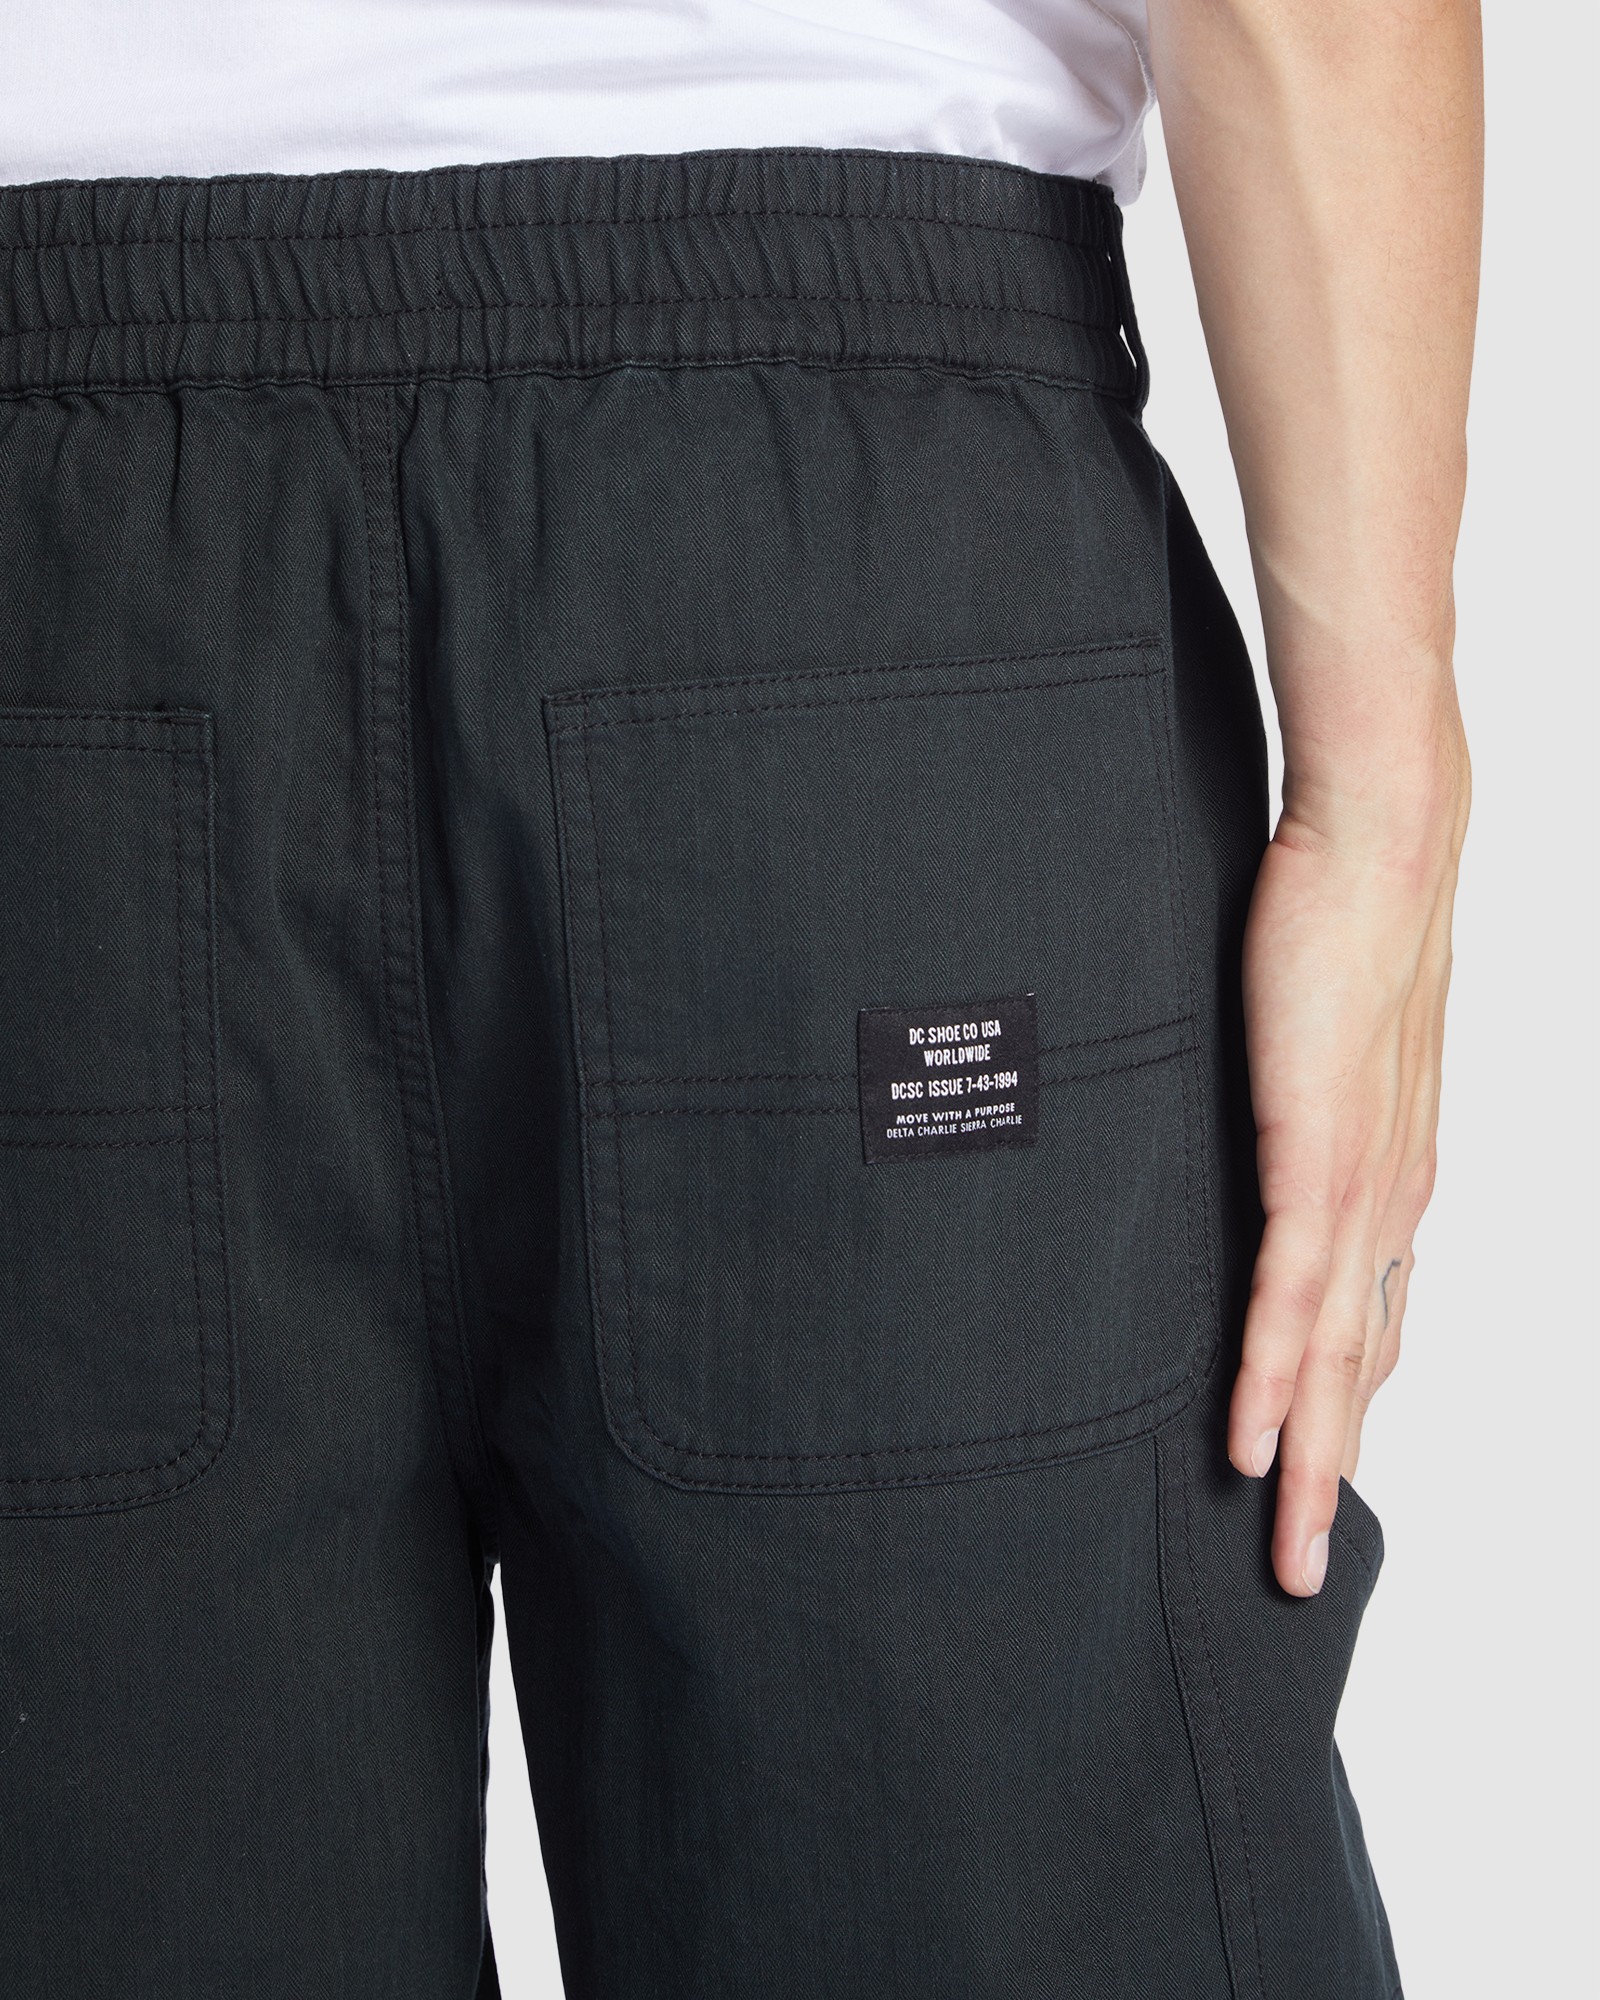 Dc Shoes Trench - Carpenter Shorts For Men - Pirate Black | SurfStitch